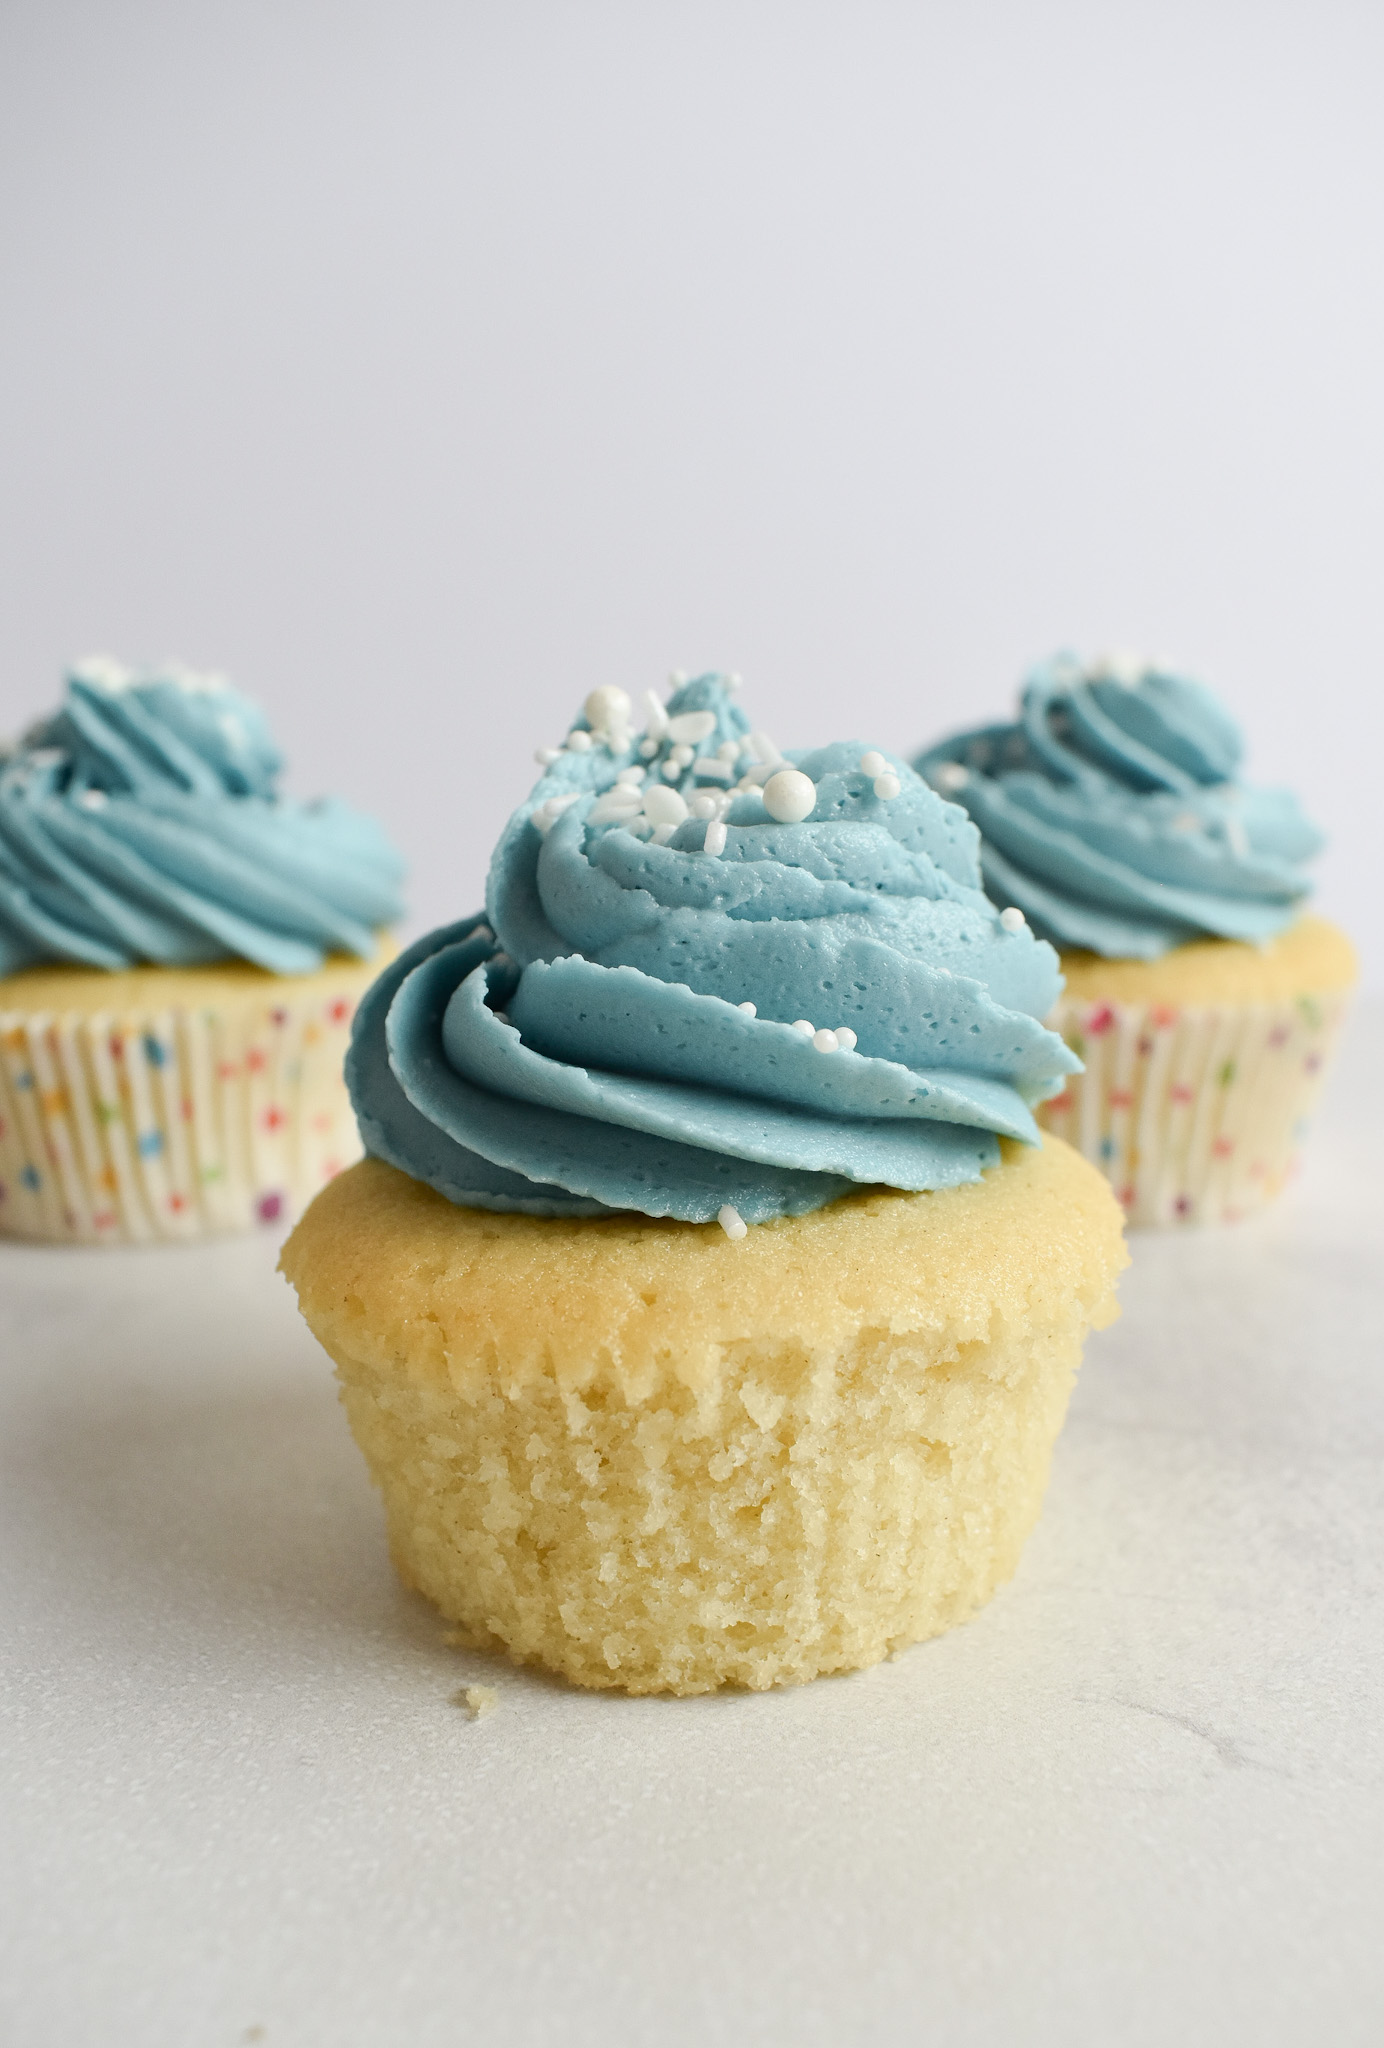 Vanilla cupcake removed from cupcake case with blue frosting.